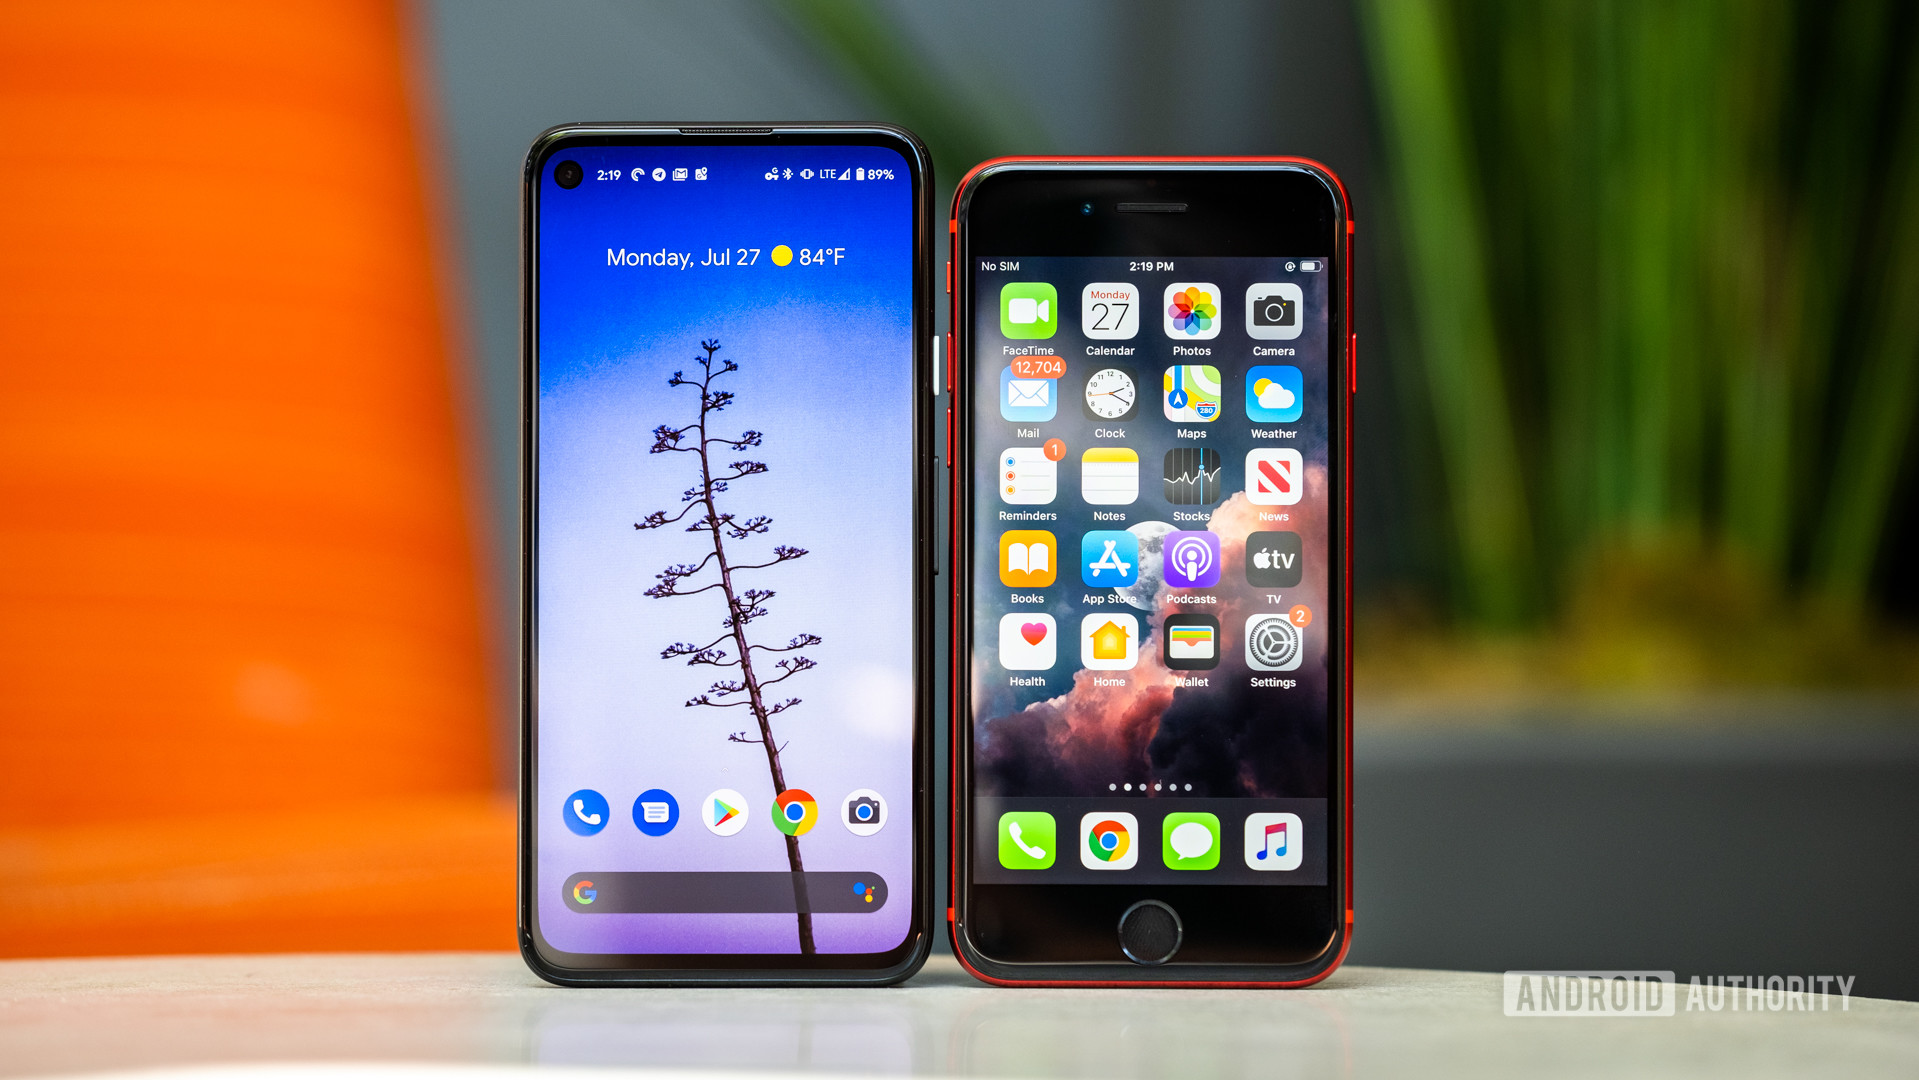 The Google Pixel 4a alongside the iPhone SE 2020 showing the displays.